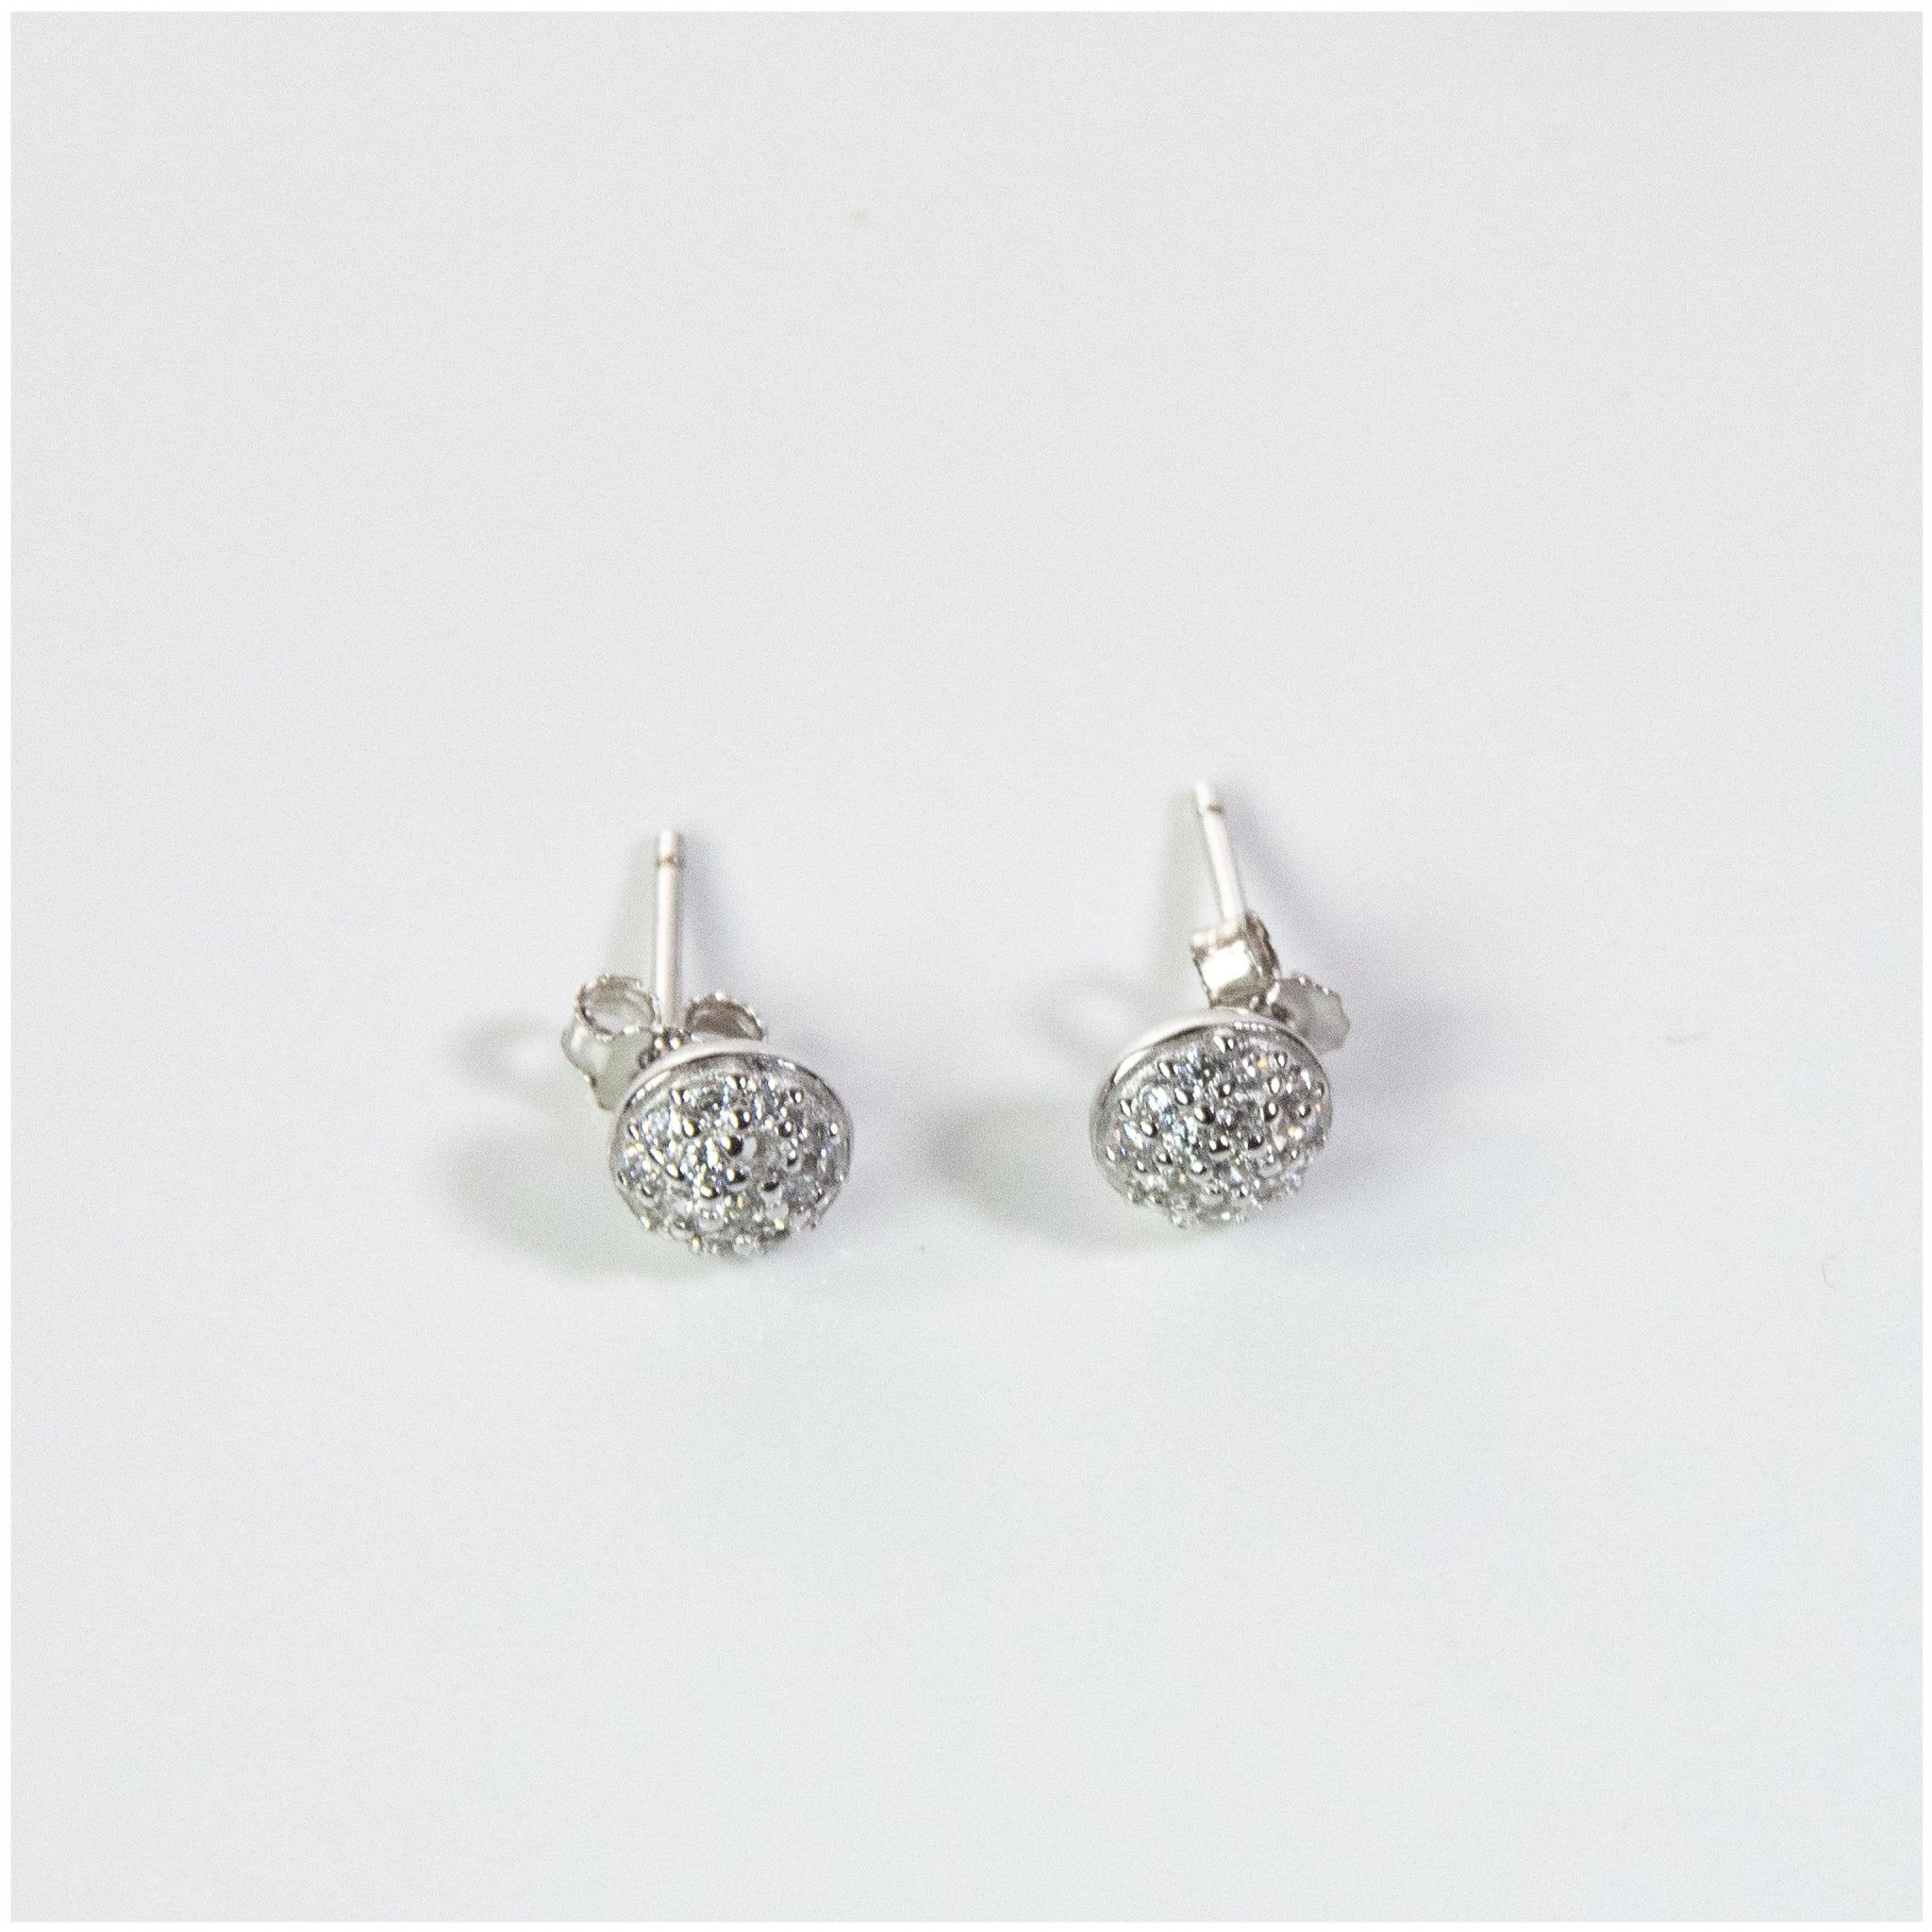 SES002 - Sterling Silver Stud Earrings with CZ